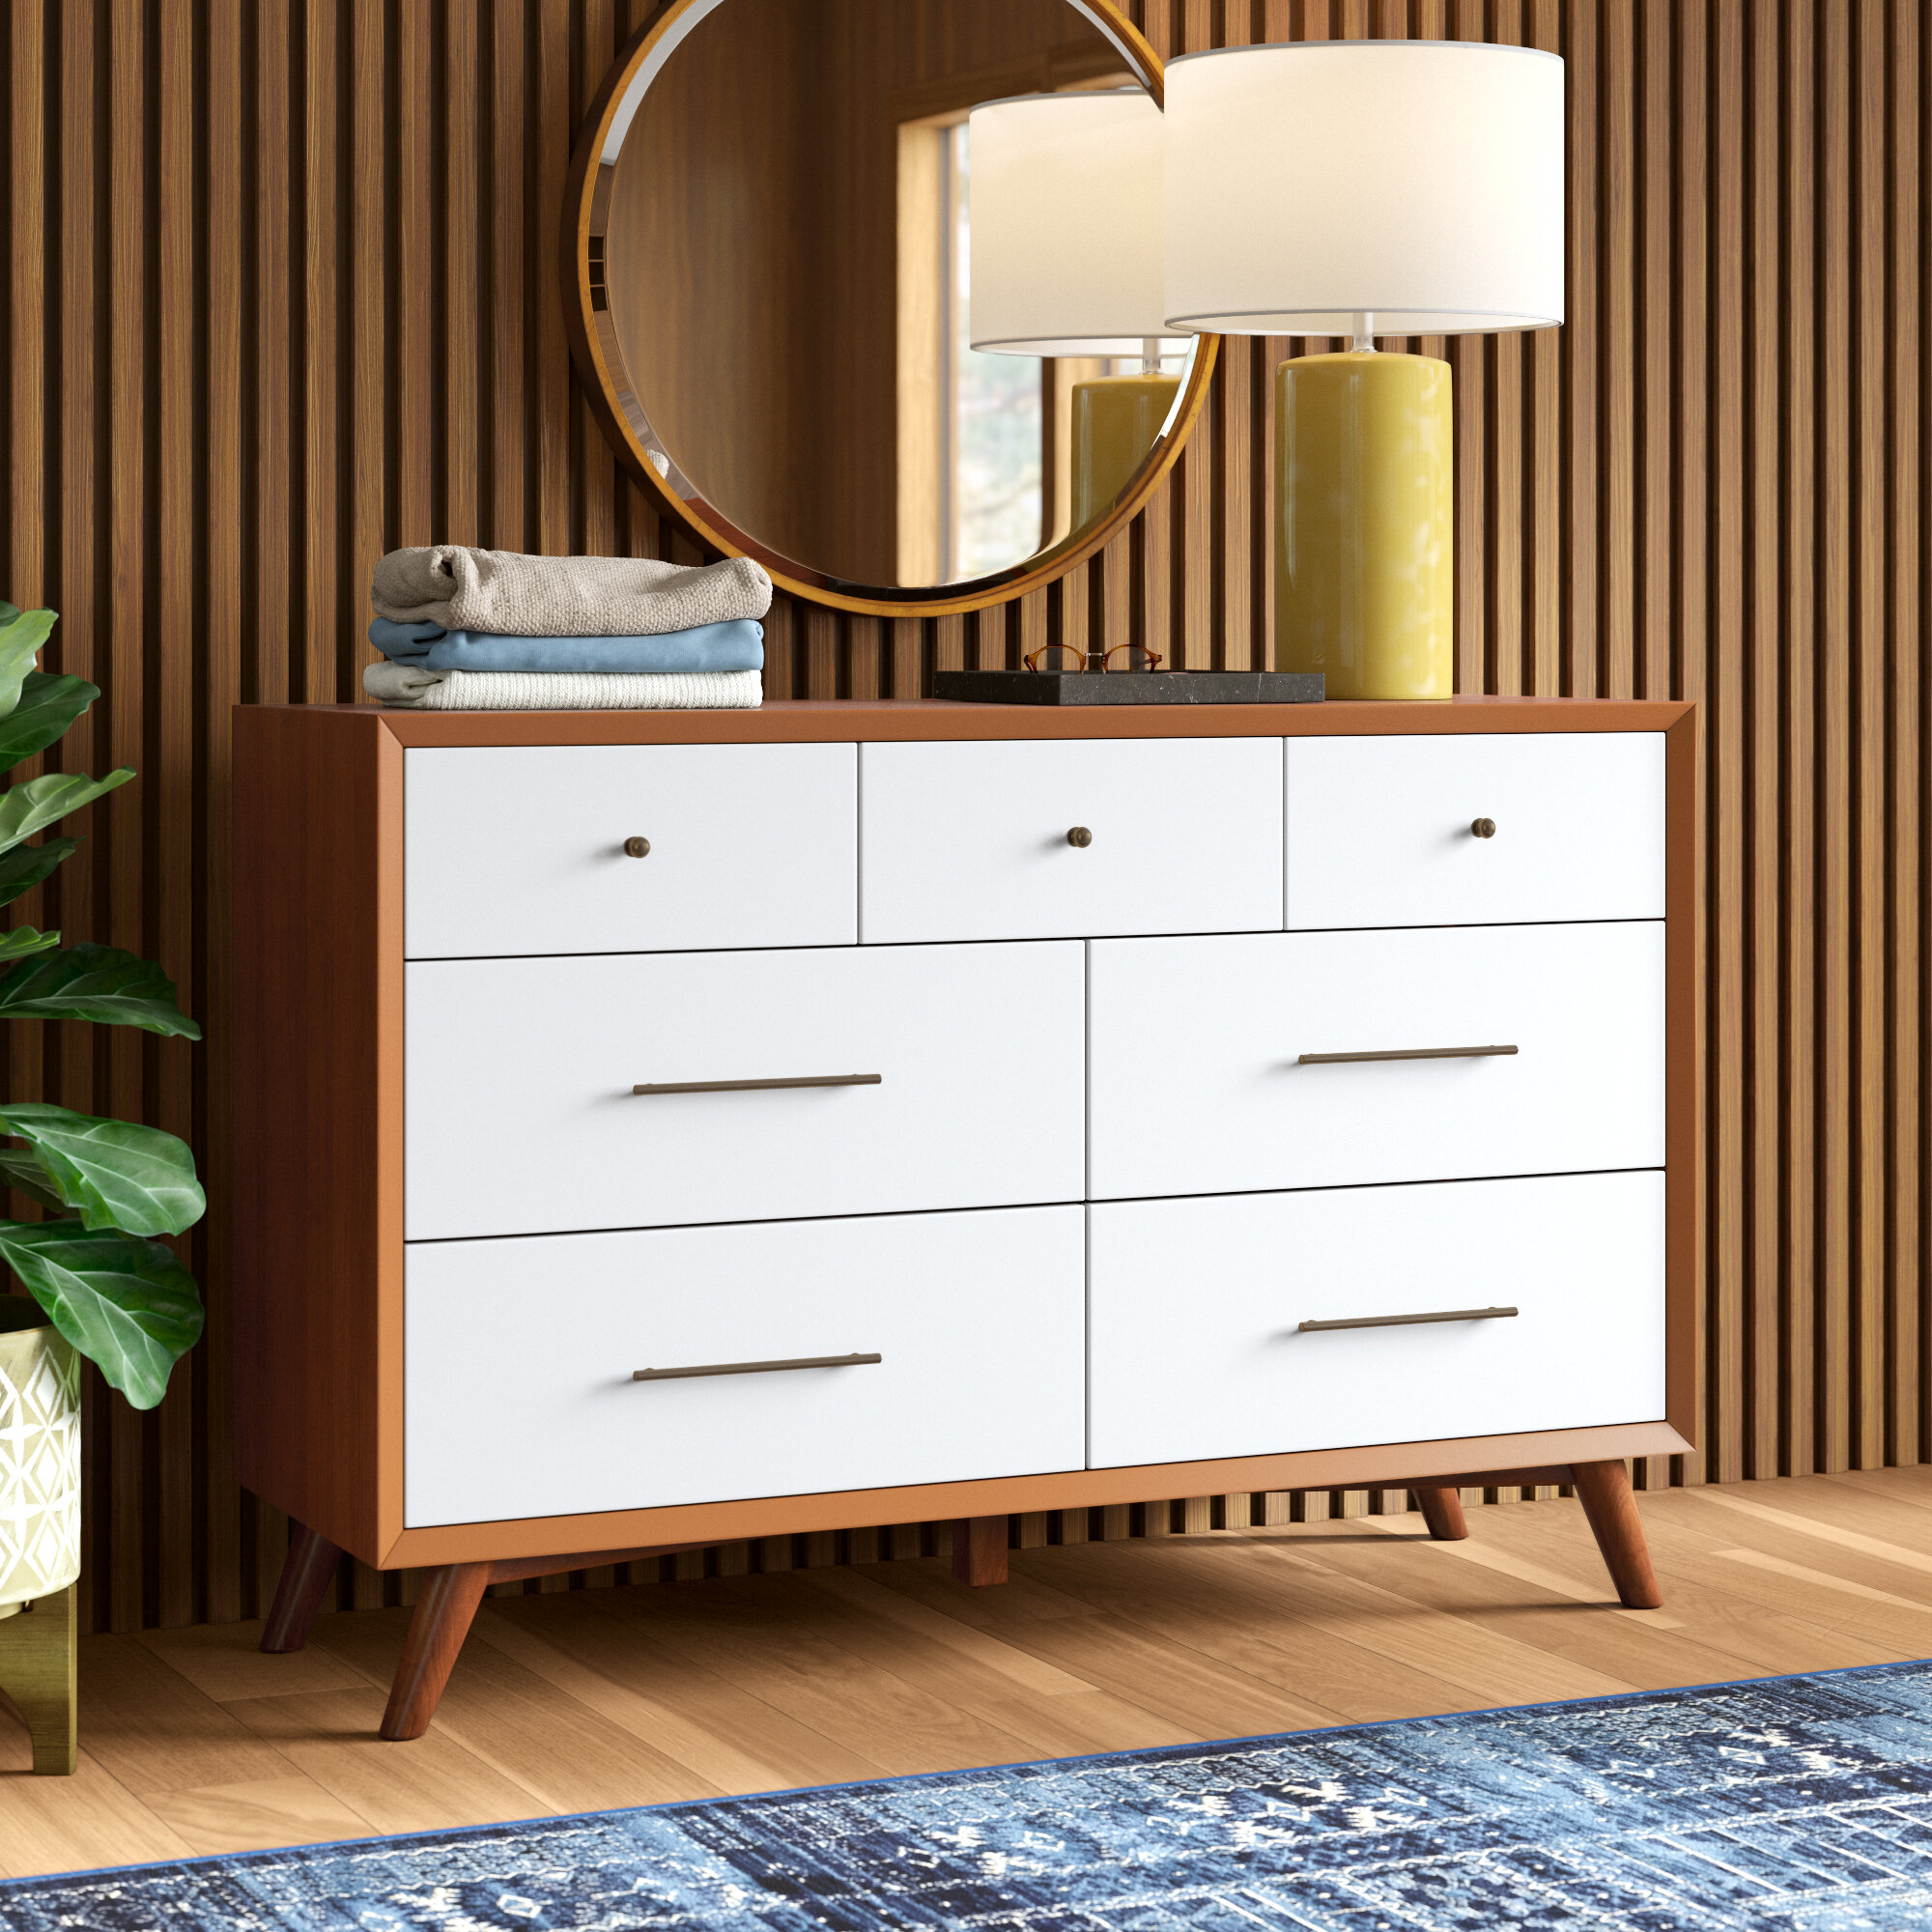 Williams Two Tone 7 Drawer Double Dresser Reviews Allmodern